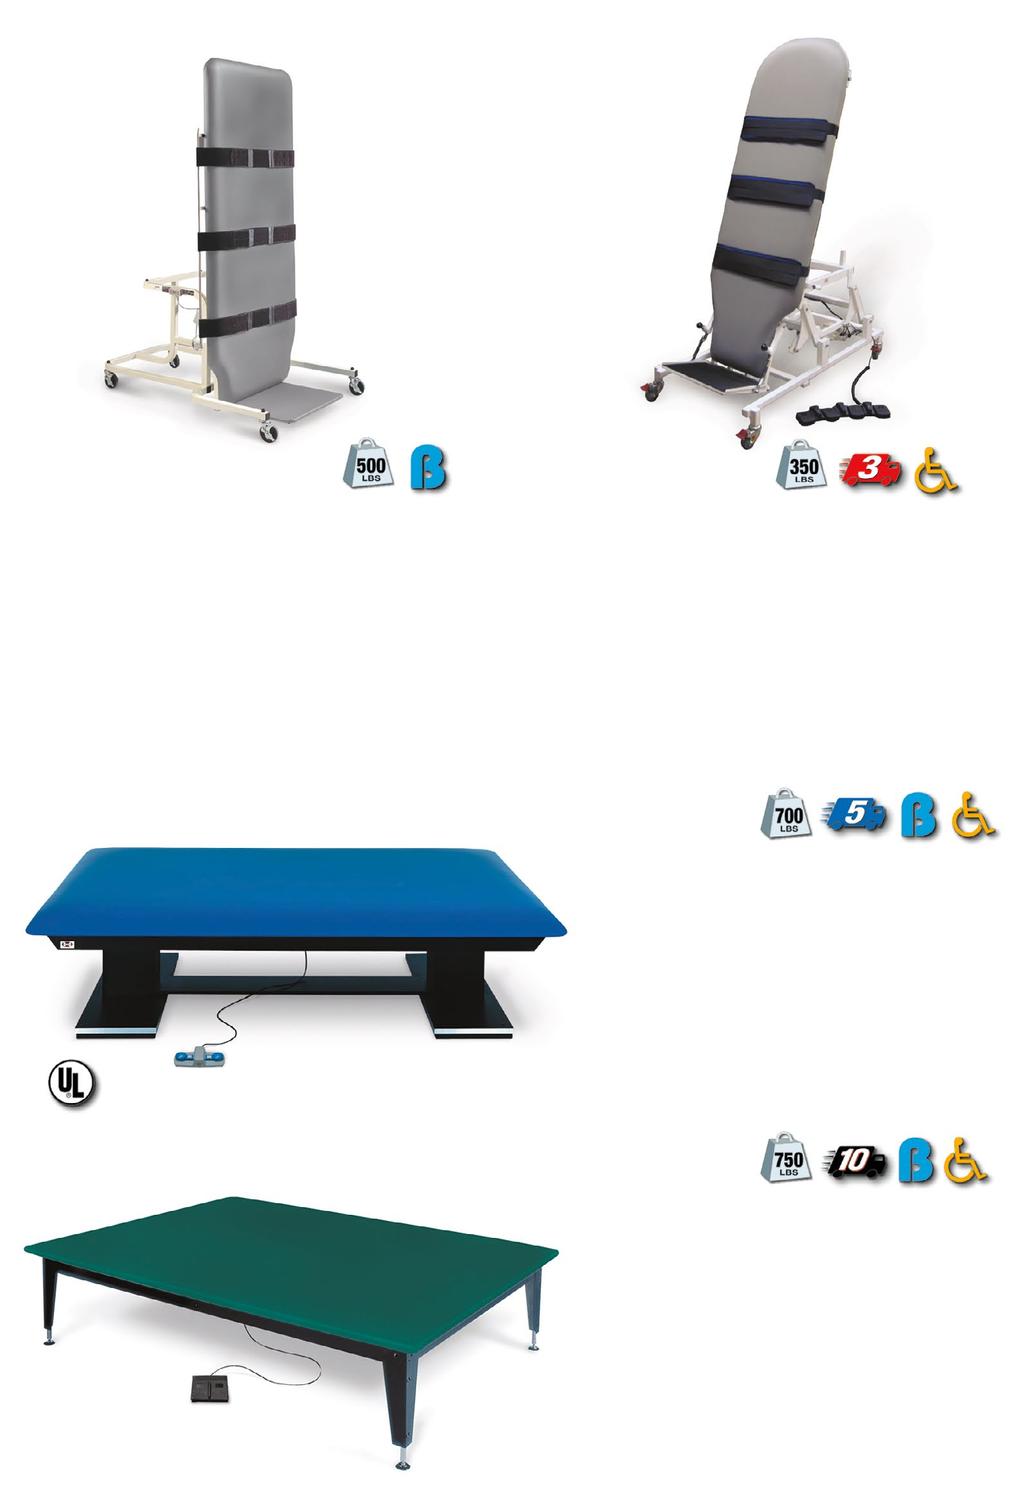 TILT TABLES/MAT PLATFORMS A. Model 6045 B. Model 6058 A. Model 6045 Bariatric Electric Tilt Table Extra-wide 34 x 77 long top upholstered in 709 Gray vinyl with 2 thick high-density urethane foam.